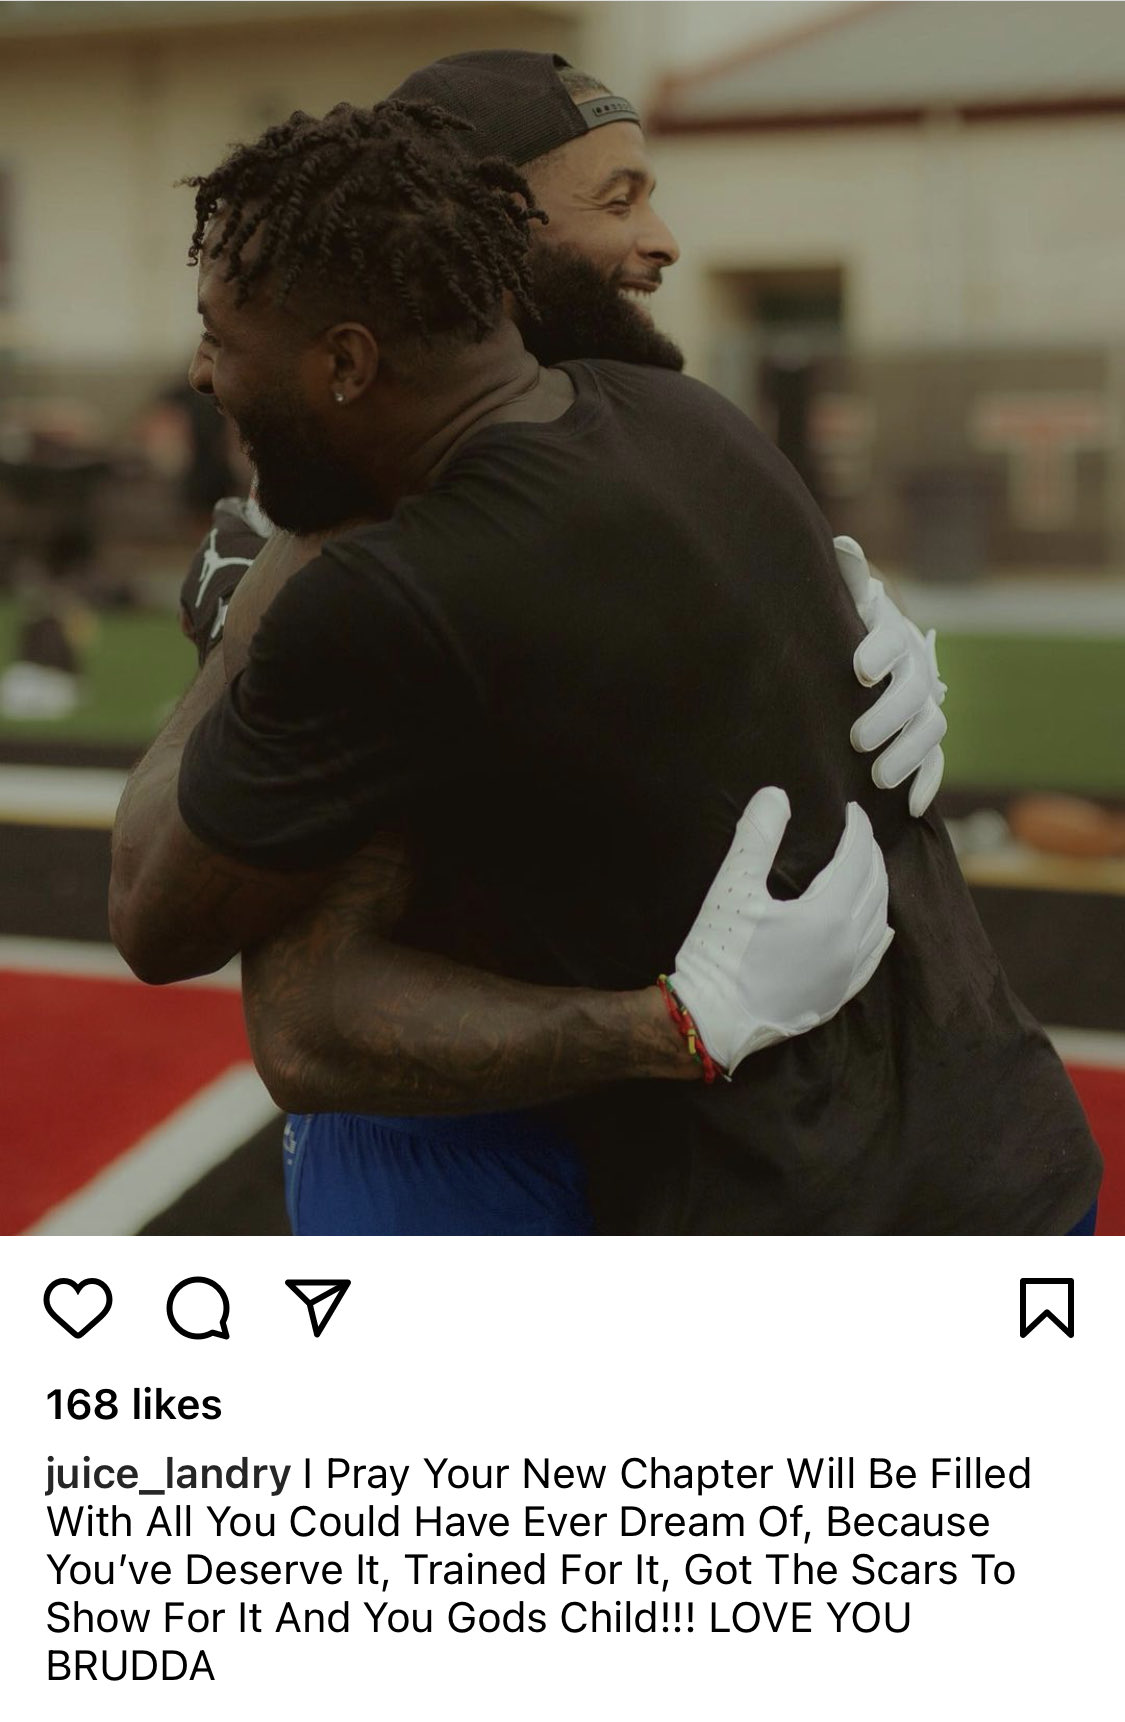  WR Jarvis Landry s happy birthday message to Odell Beckham Jr. on IG 